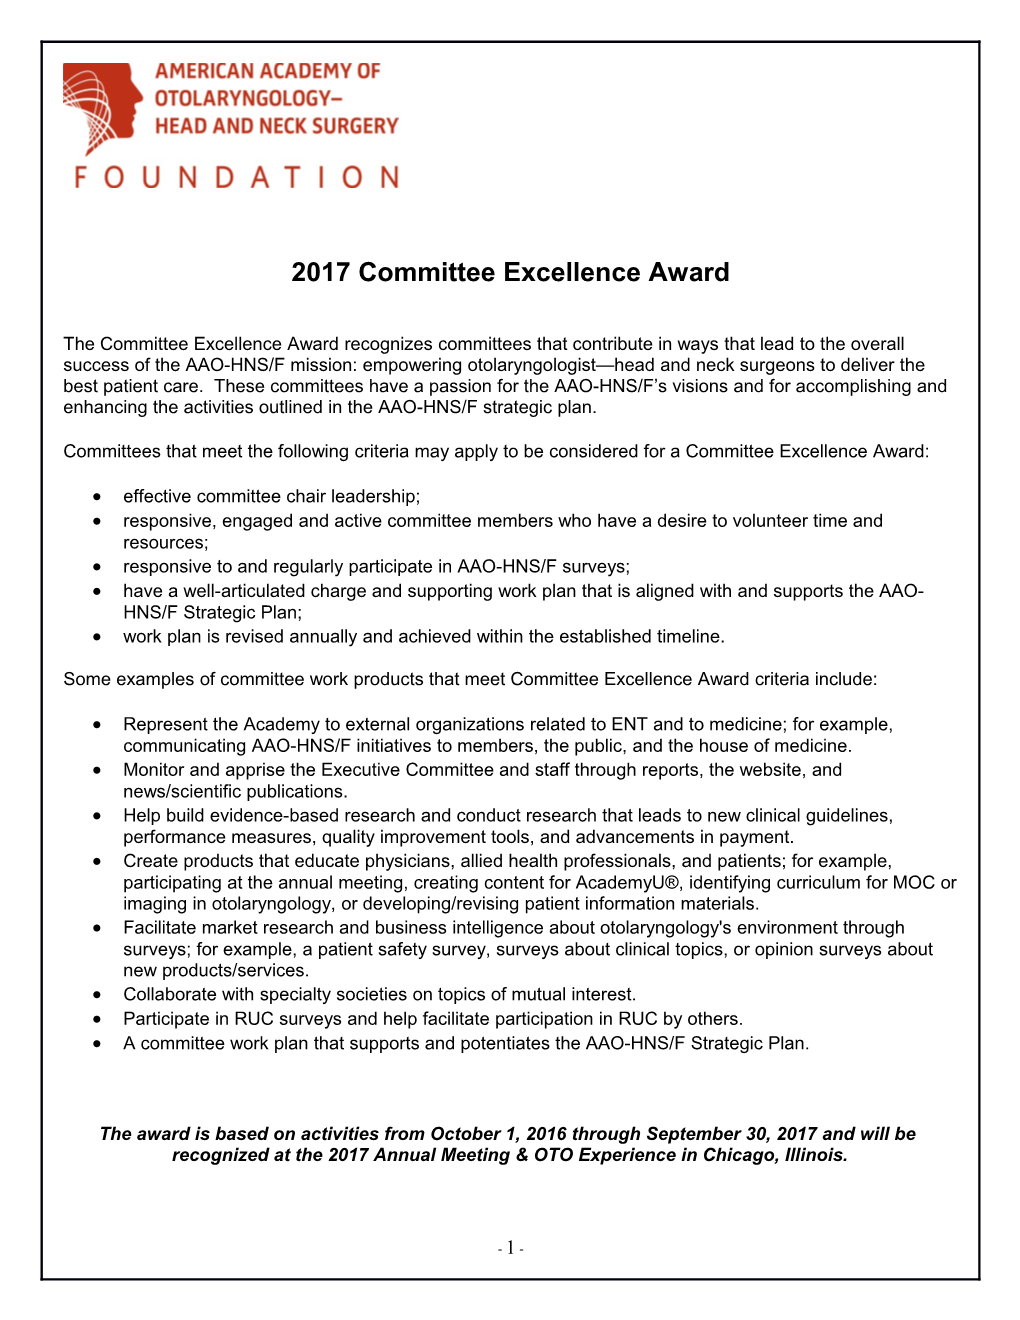 The Committeeexcellence Award Recognizes Committees That Contribute in Ways That Lead To